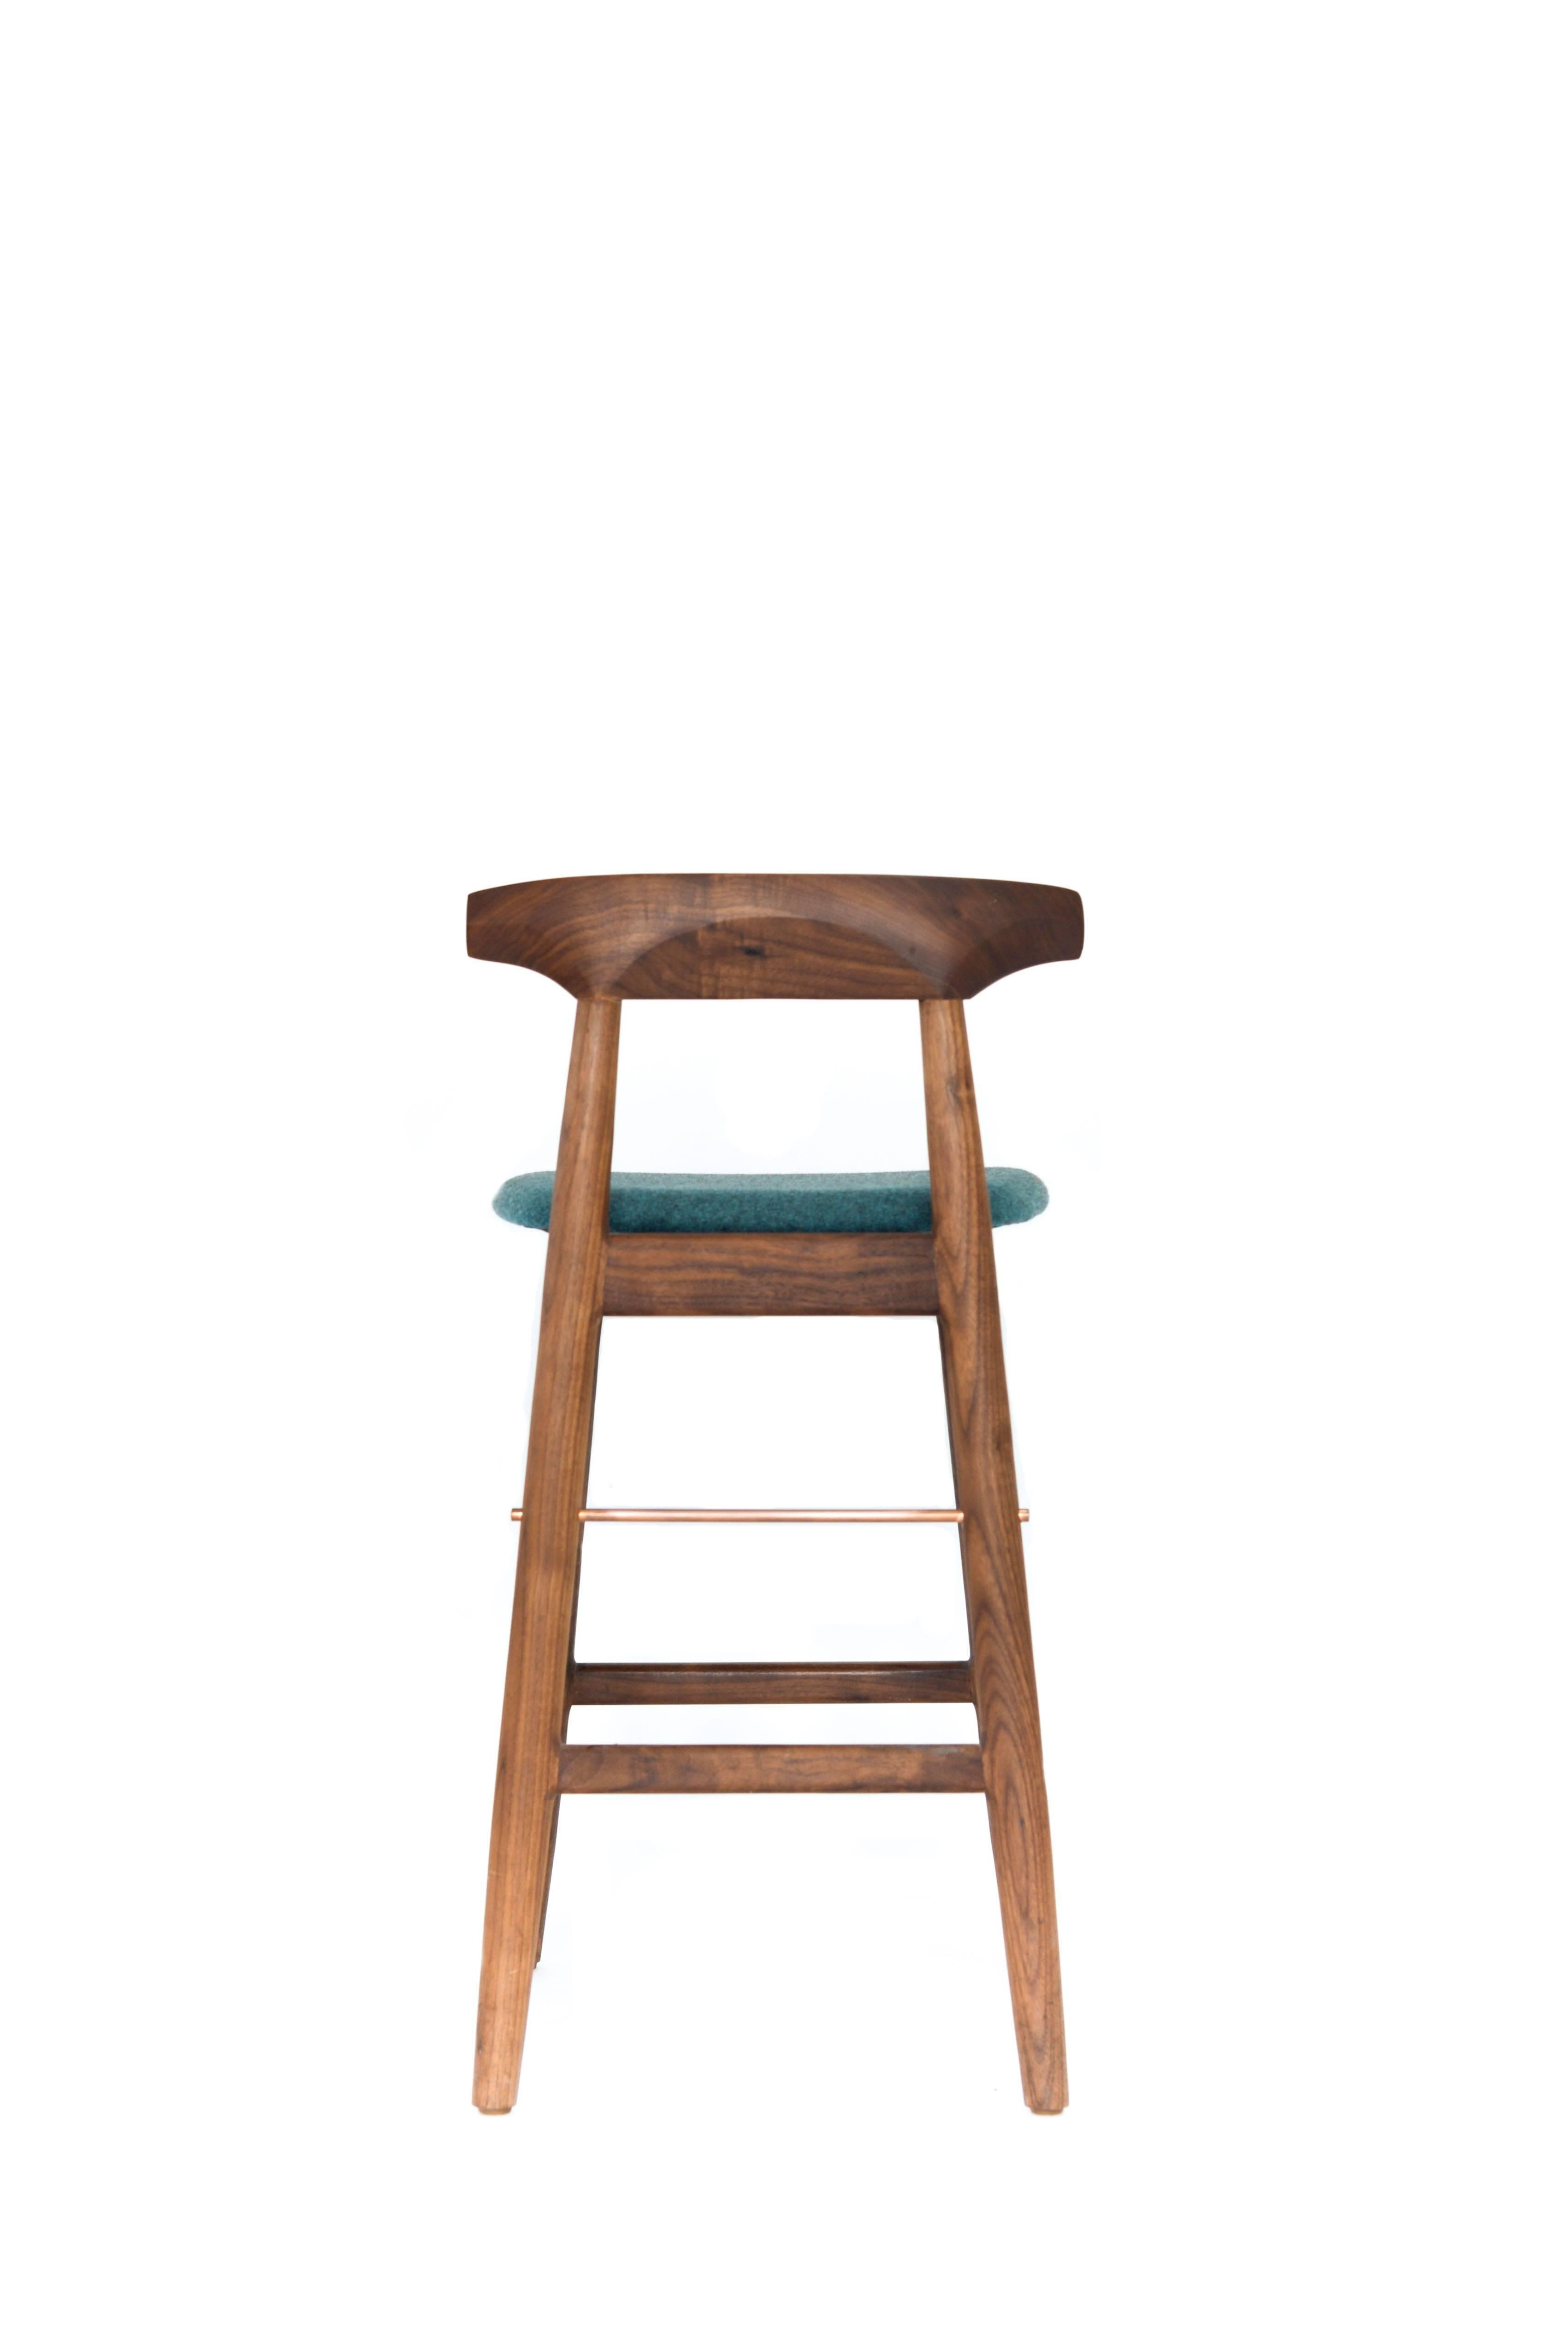 American Walnut and Copper Wood High Stool with Custom Teal Felt Upholstery For Sale